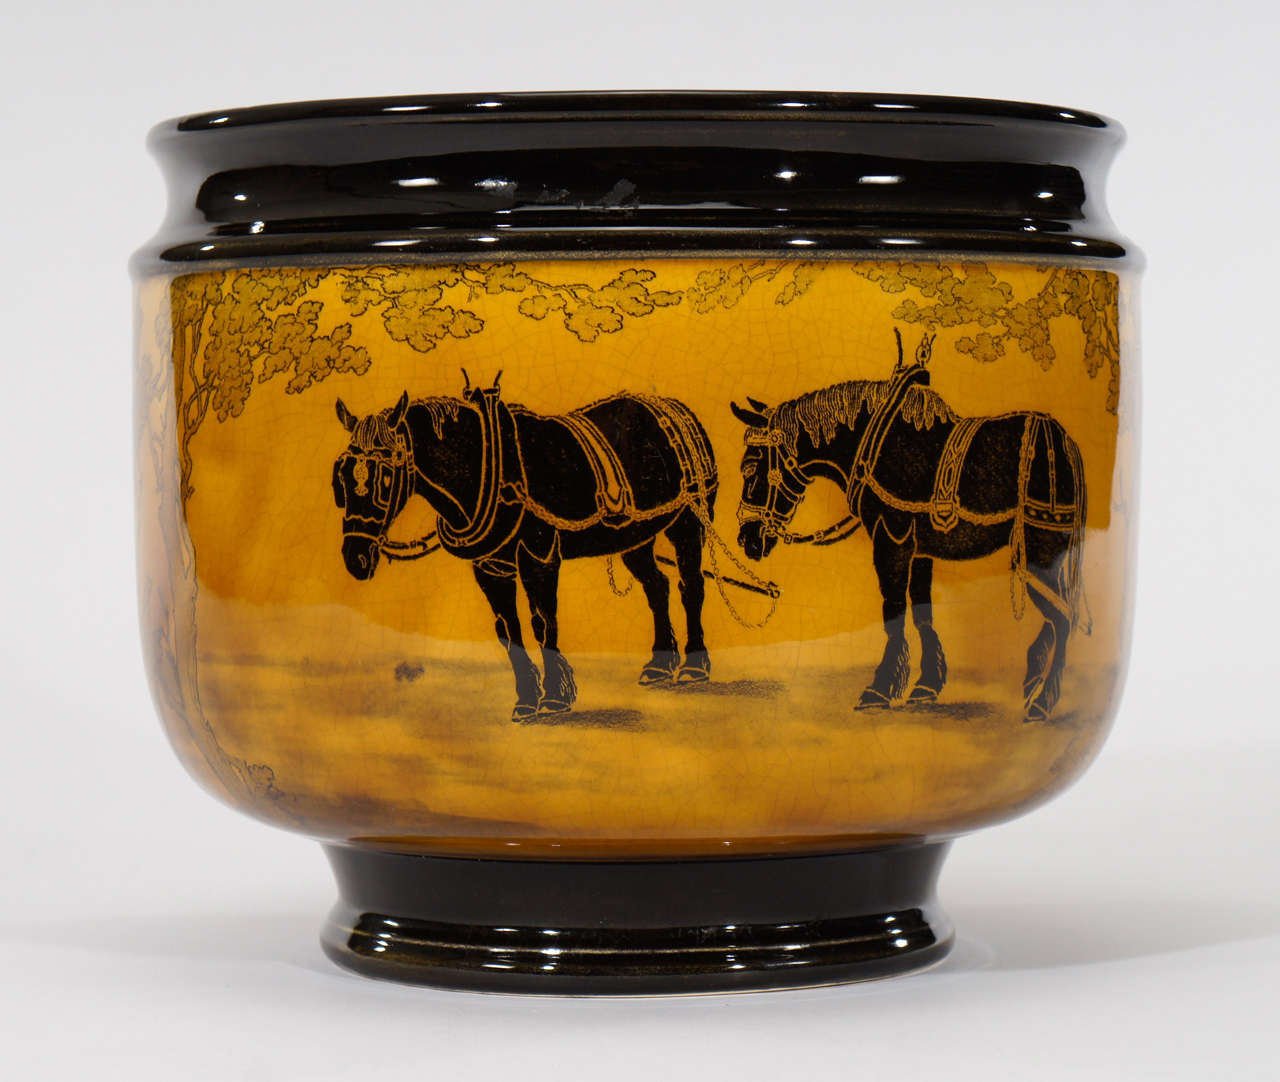 Impressively large Arts and Crafts amber-yellow jardiniere decorated with striking black, contrasted work work horses that encircle the body of the vessel. The pattern is named 